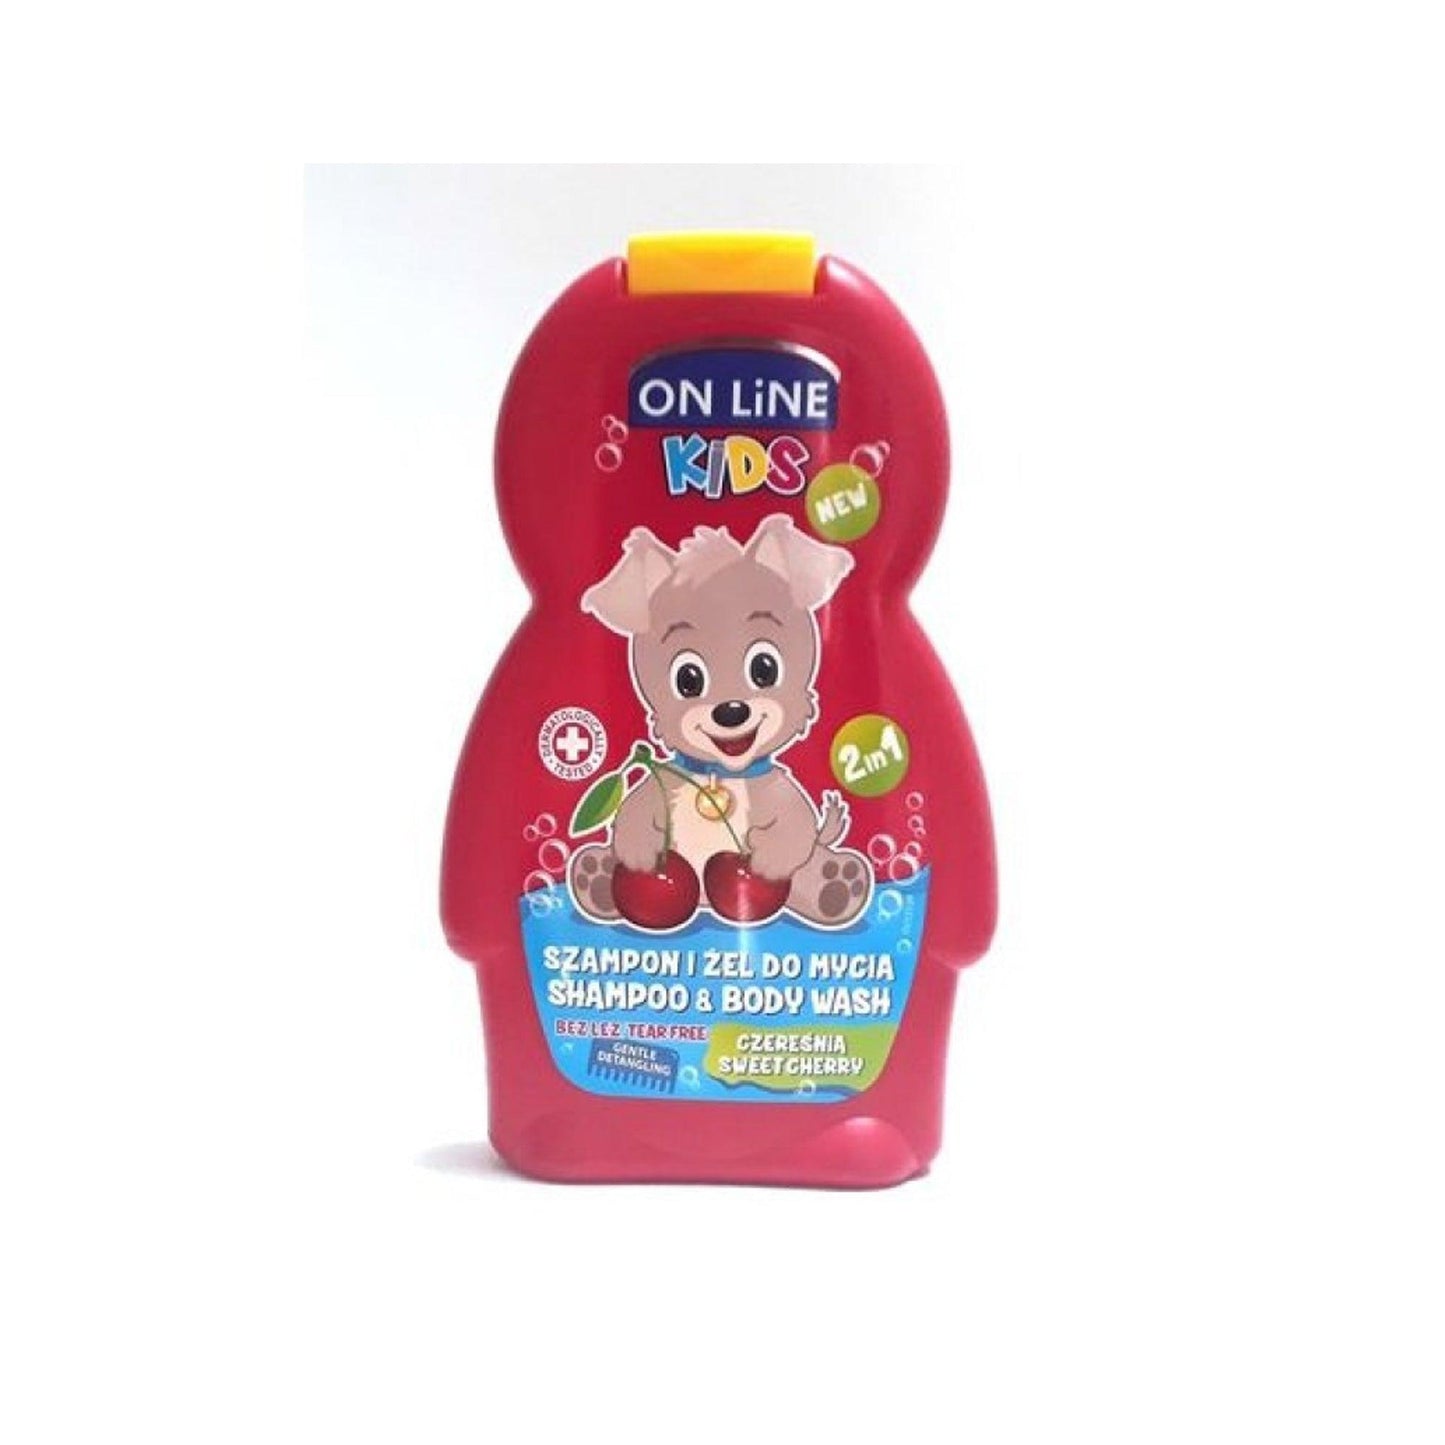 On Line 2 In1 Kids Shampoo And Body Wash With Sweet Cherry - Beauty Bounty